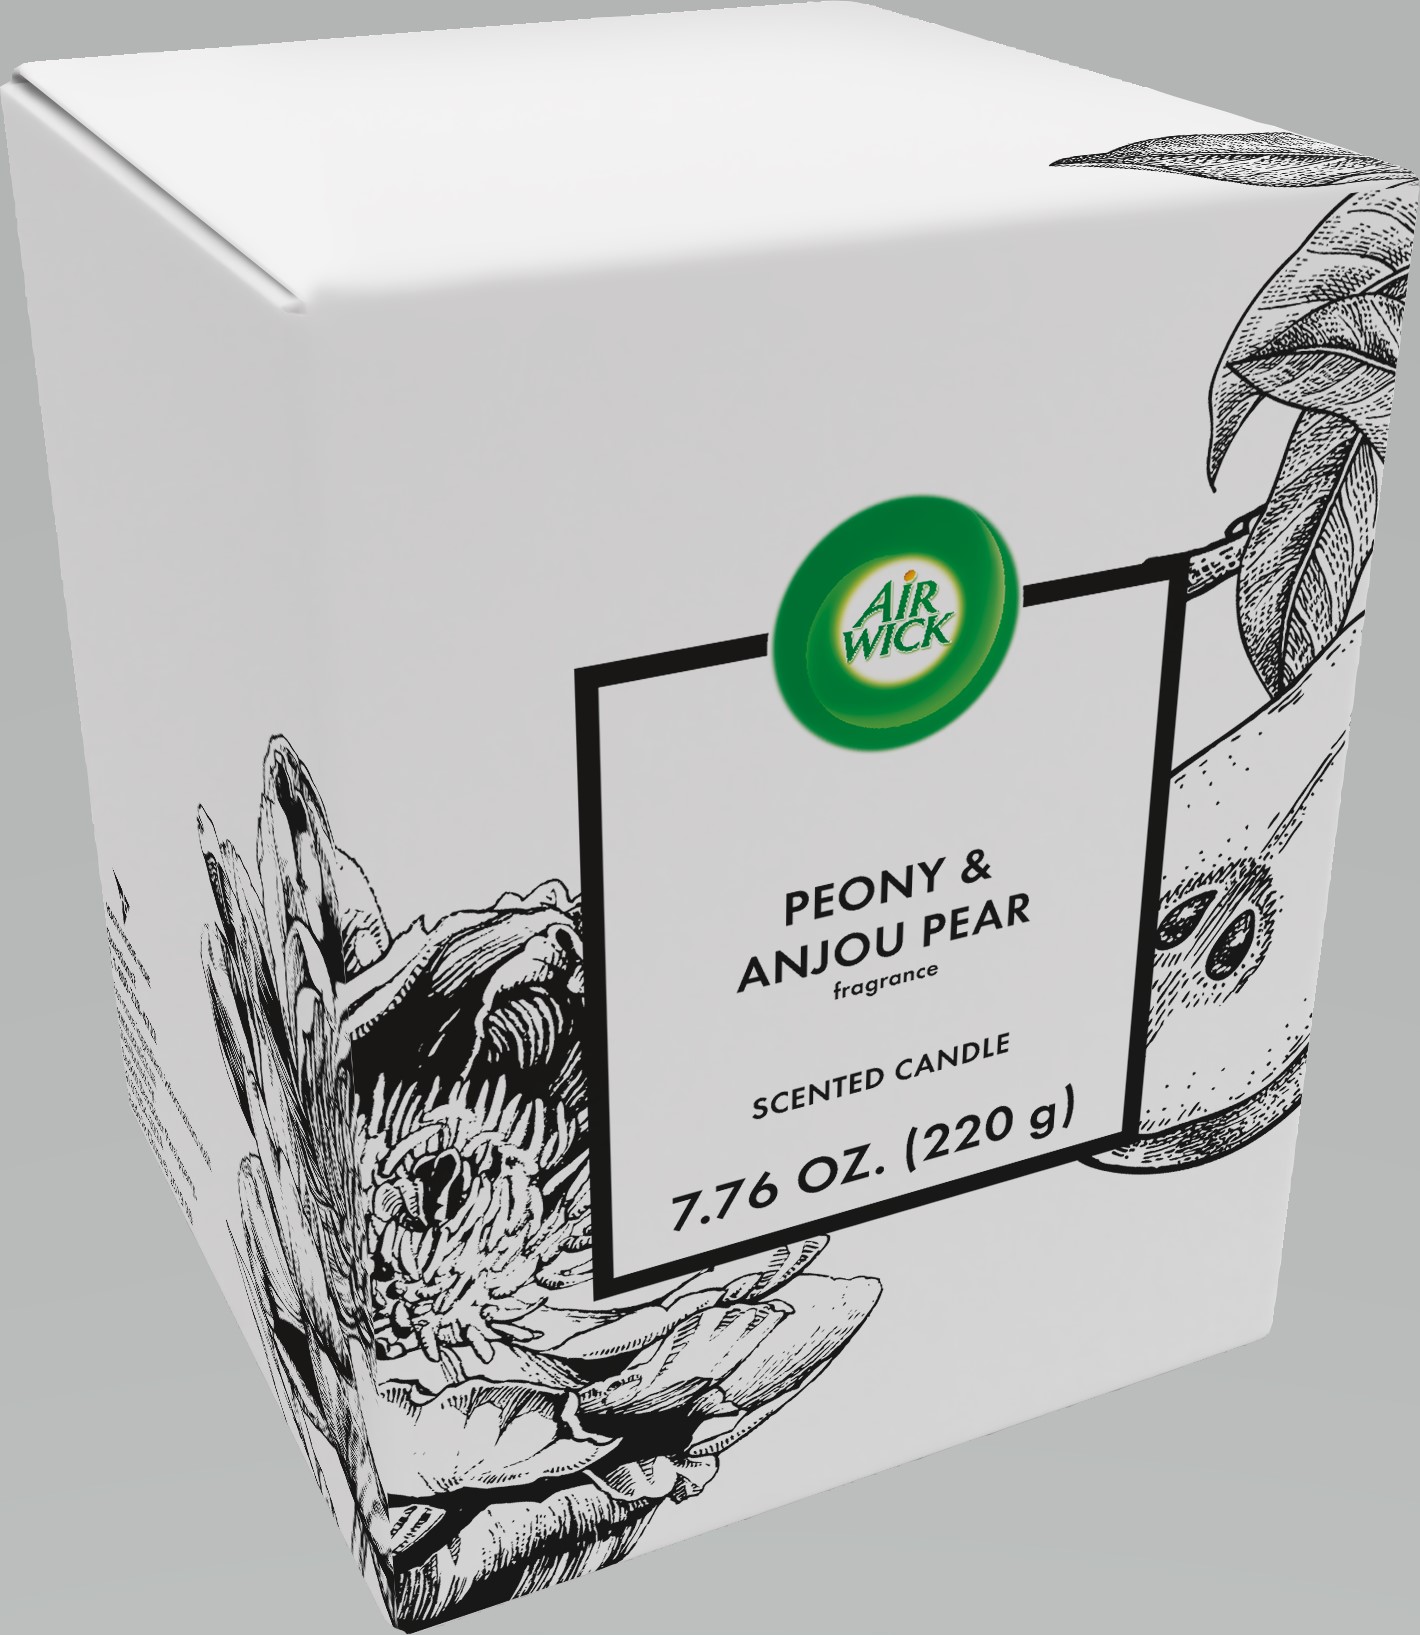 AIR WICK Candle  Peony  Anjou Pear 